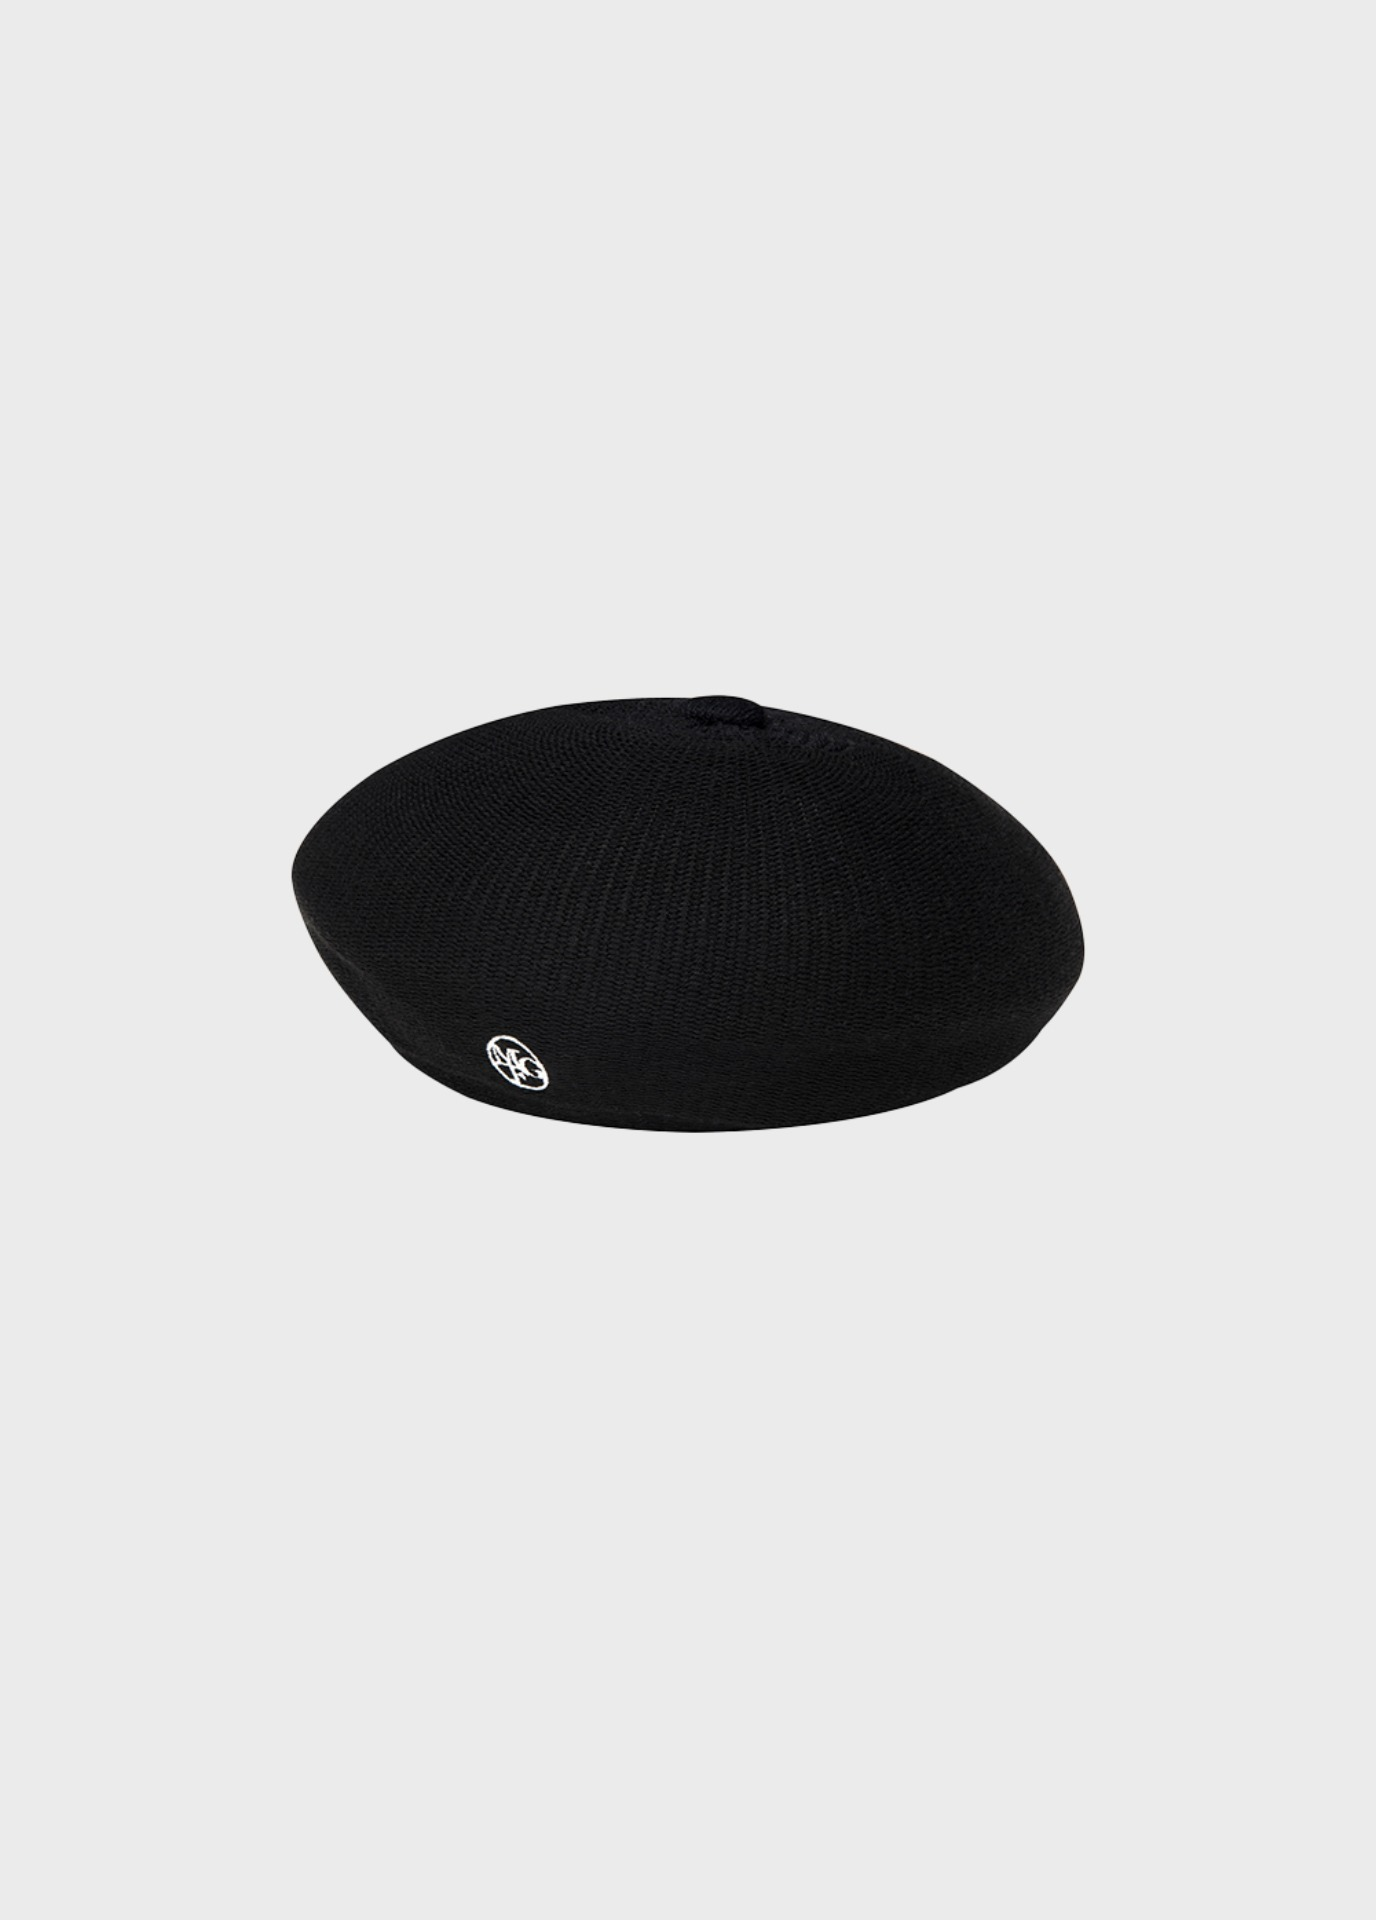 EMBROIDERY KNIT BERET black